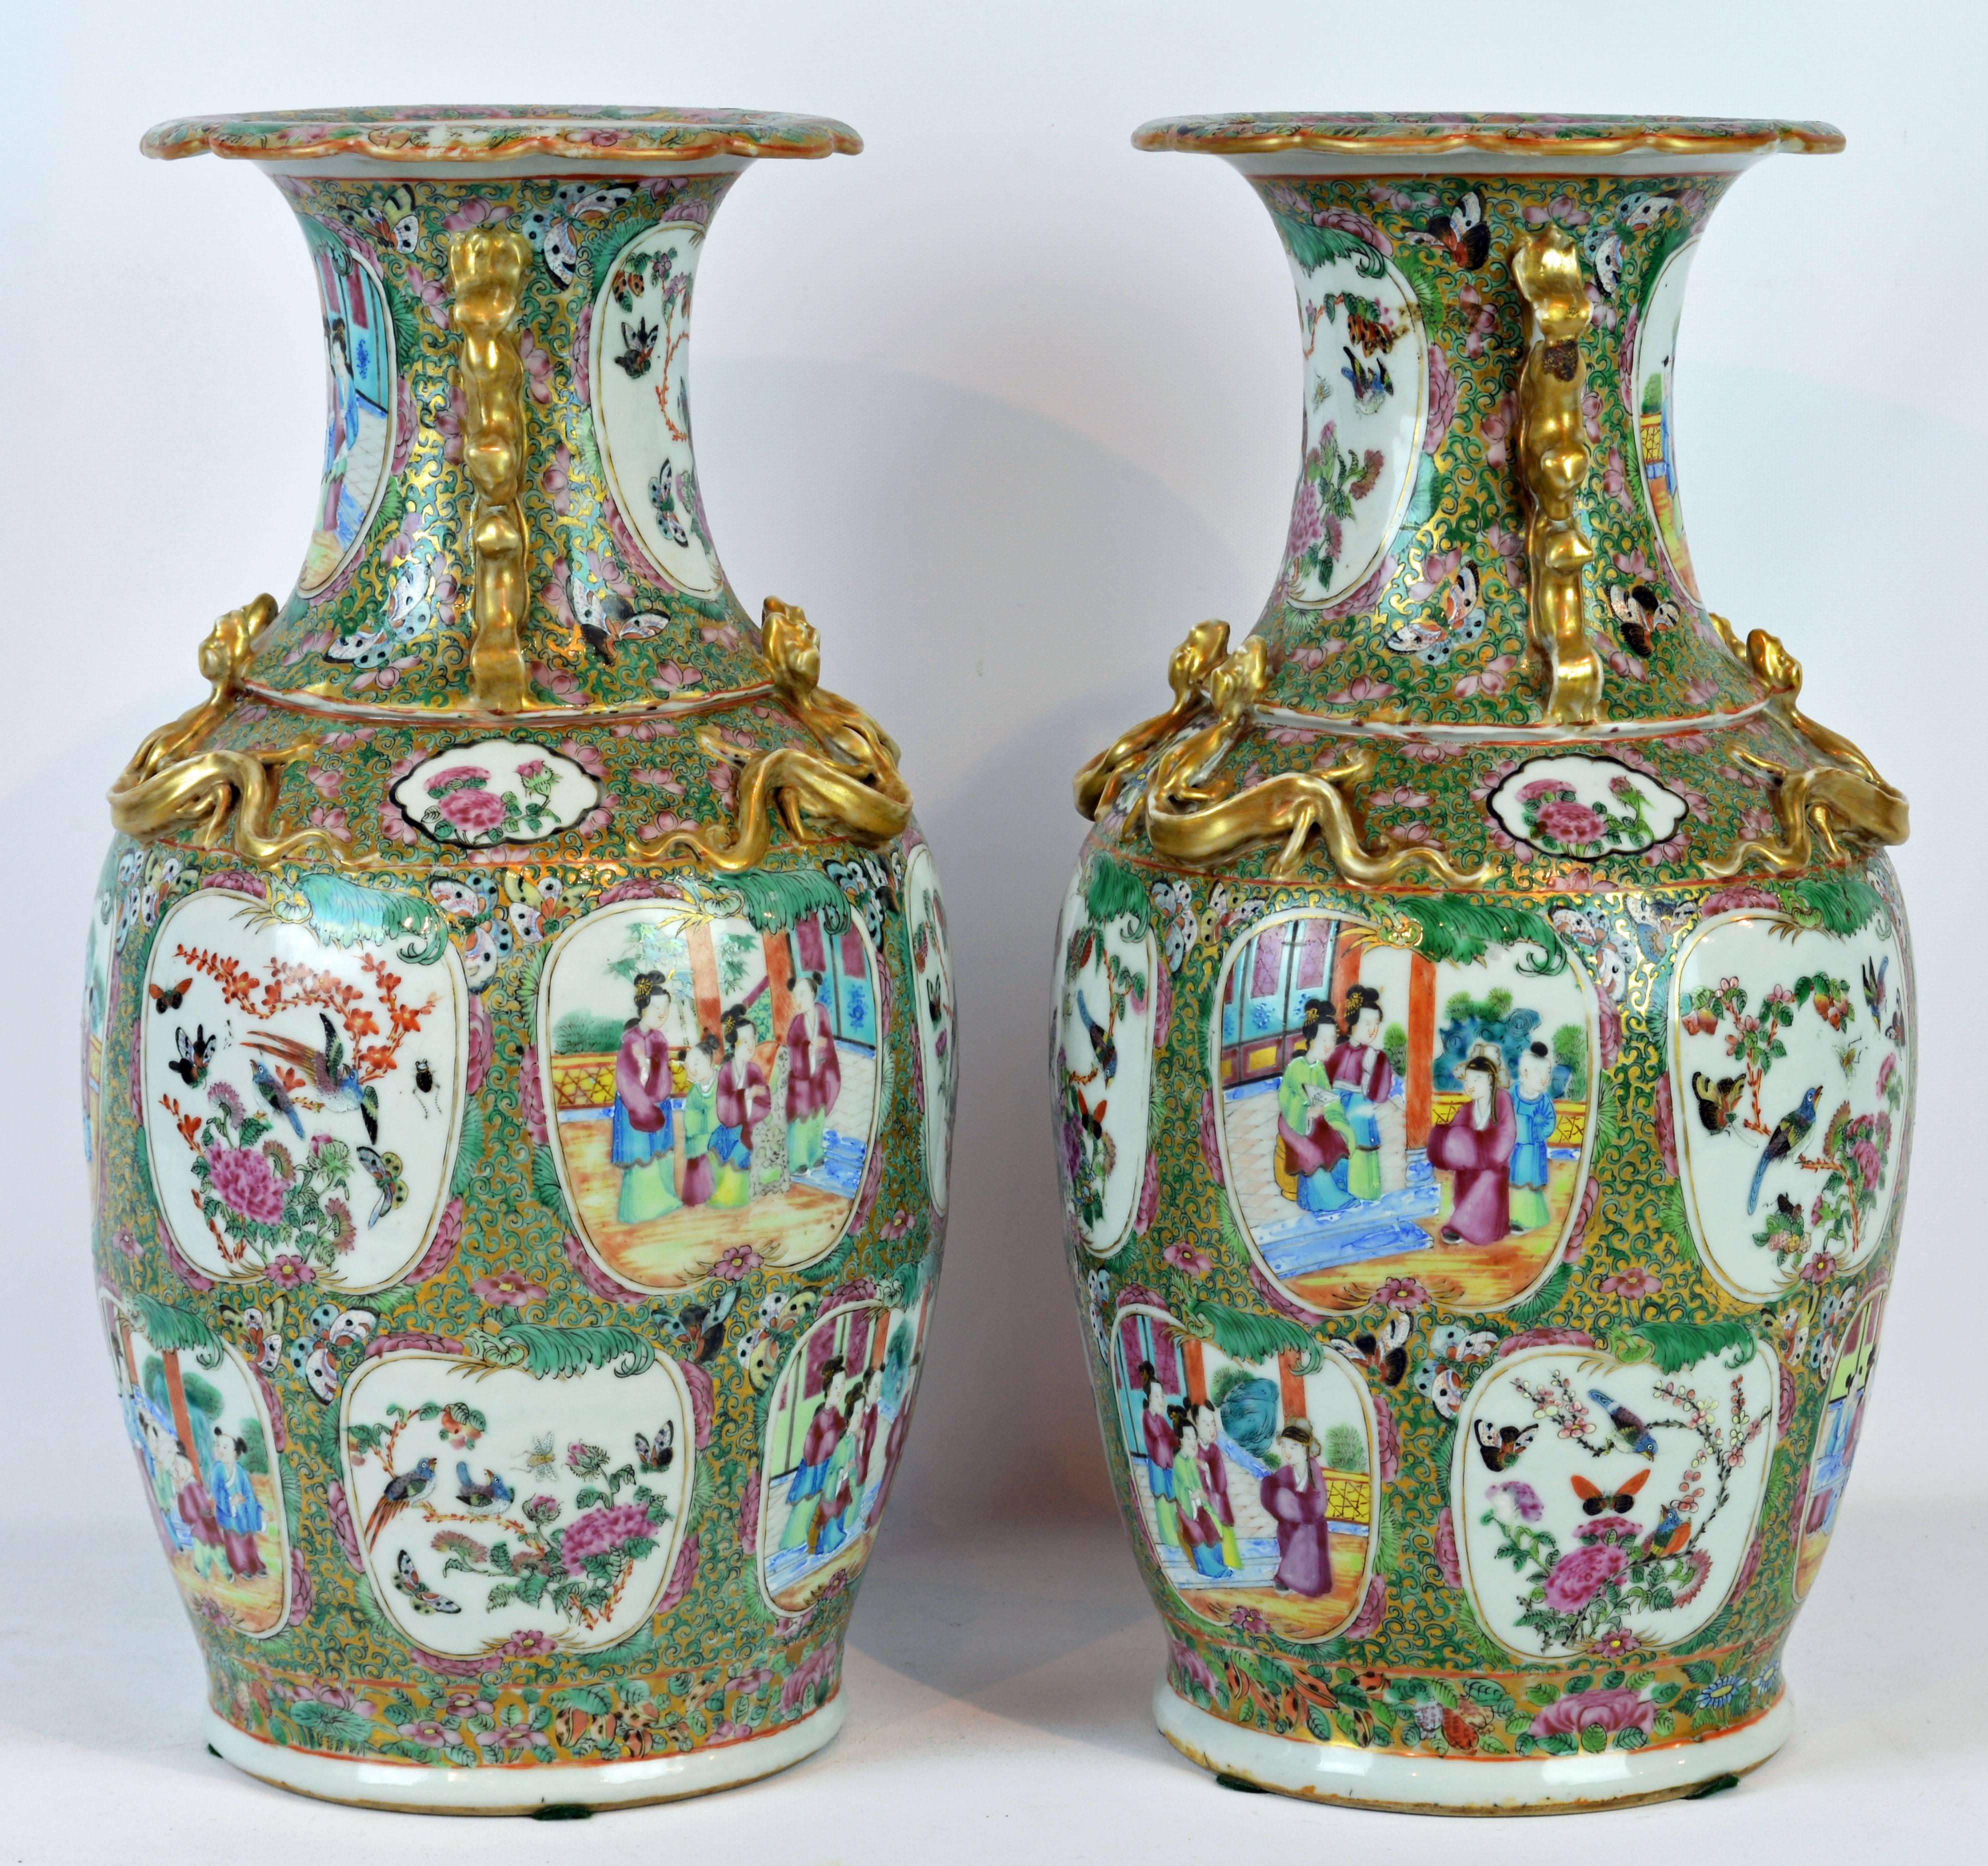 This fine 19th century pair of rose medallion vases adorned with high relief gilt lizards and animal handles feature cartouches depicting family life, flowers and birds on a green and pink enameled ground.